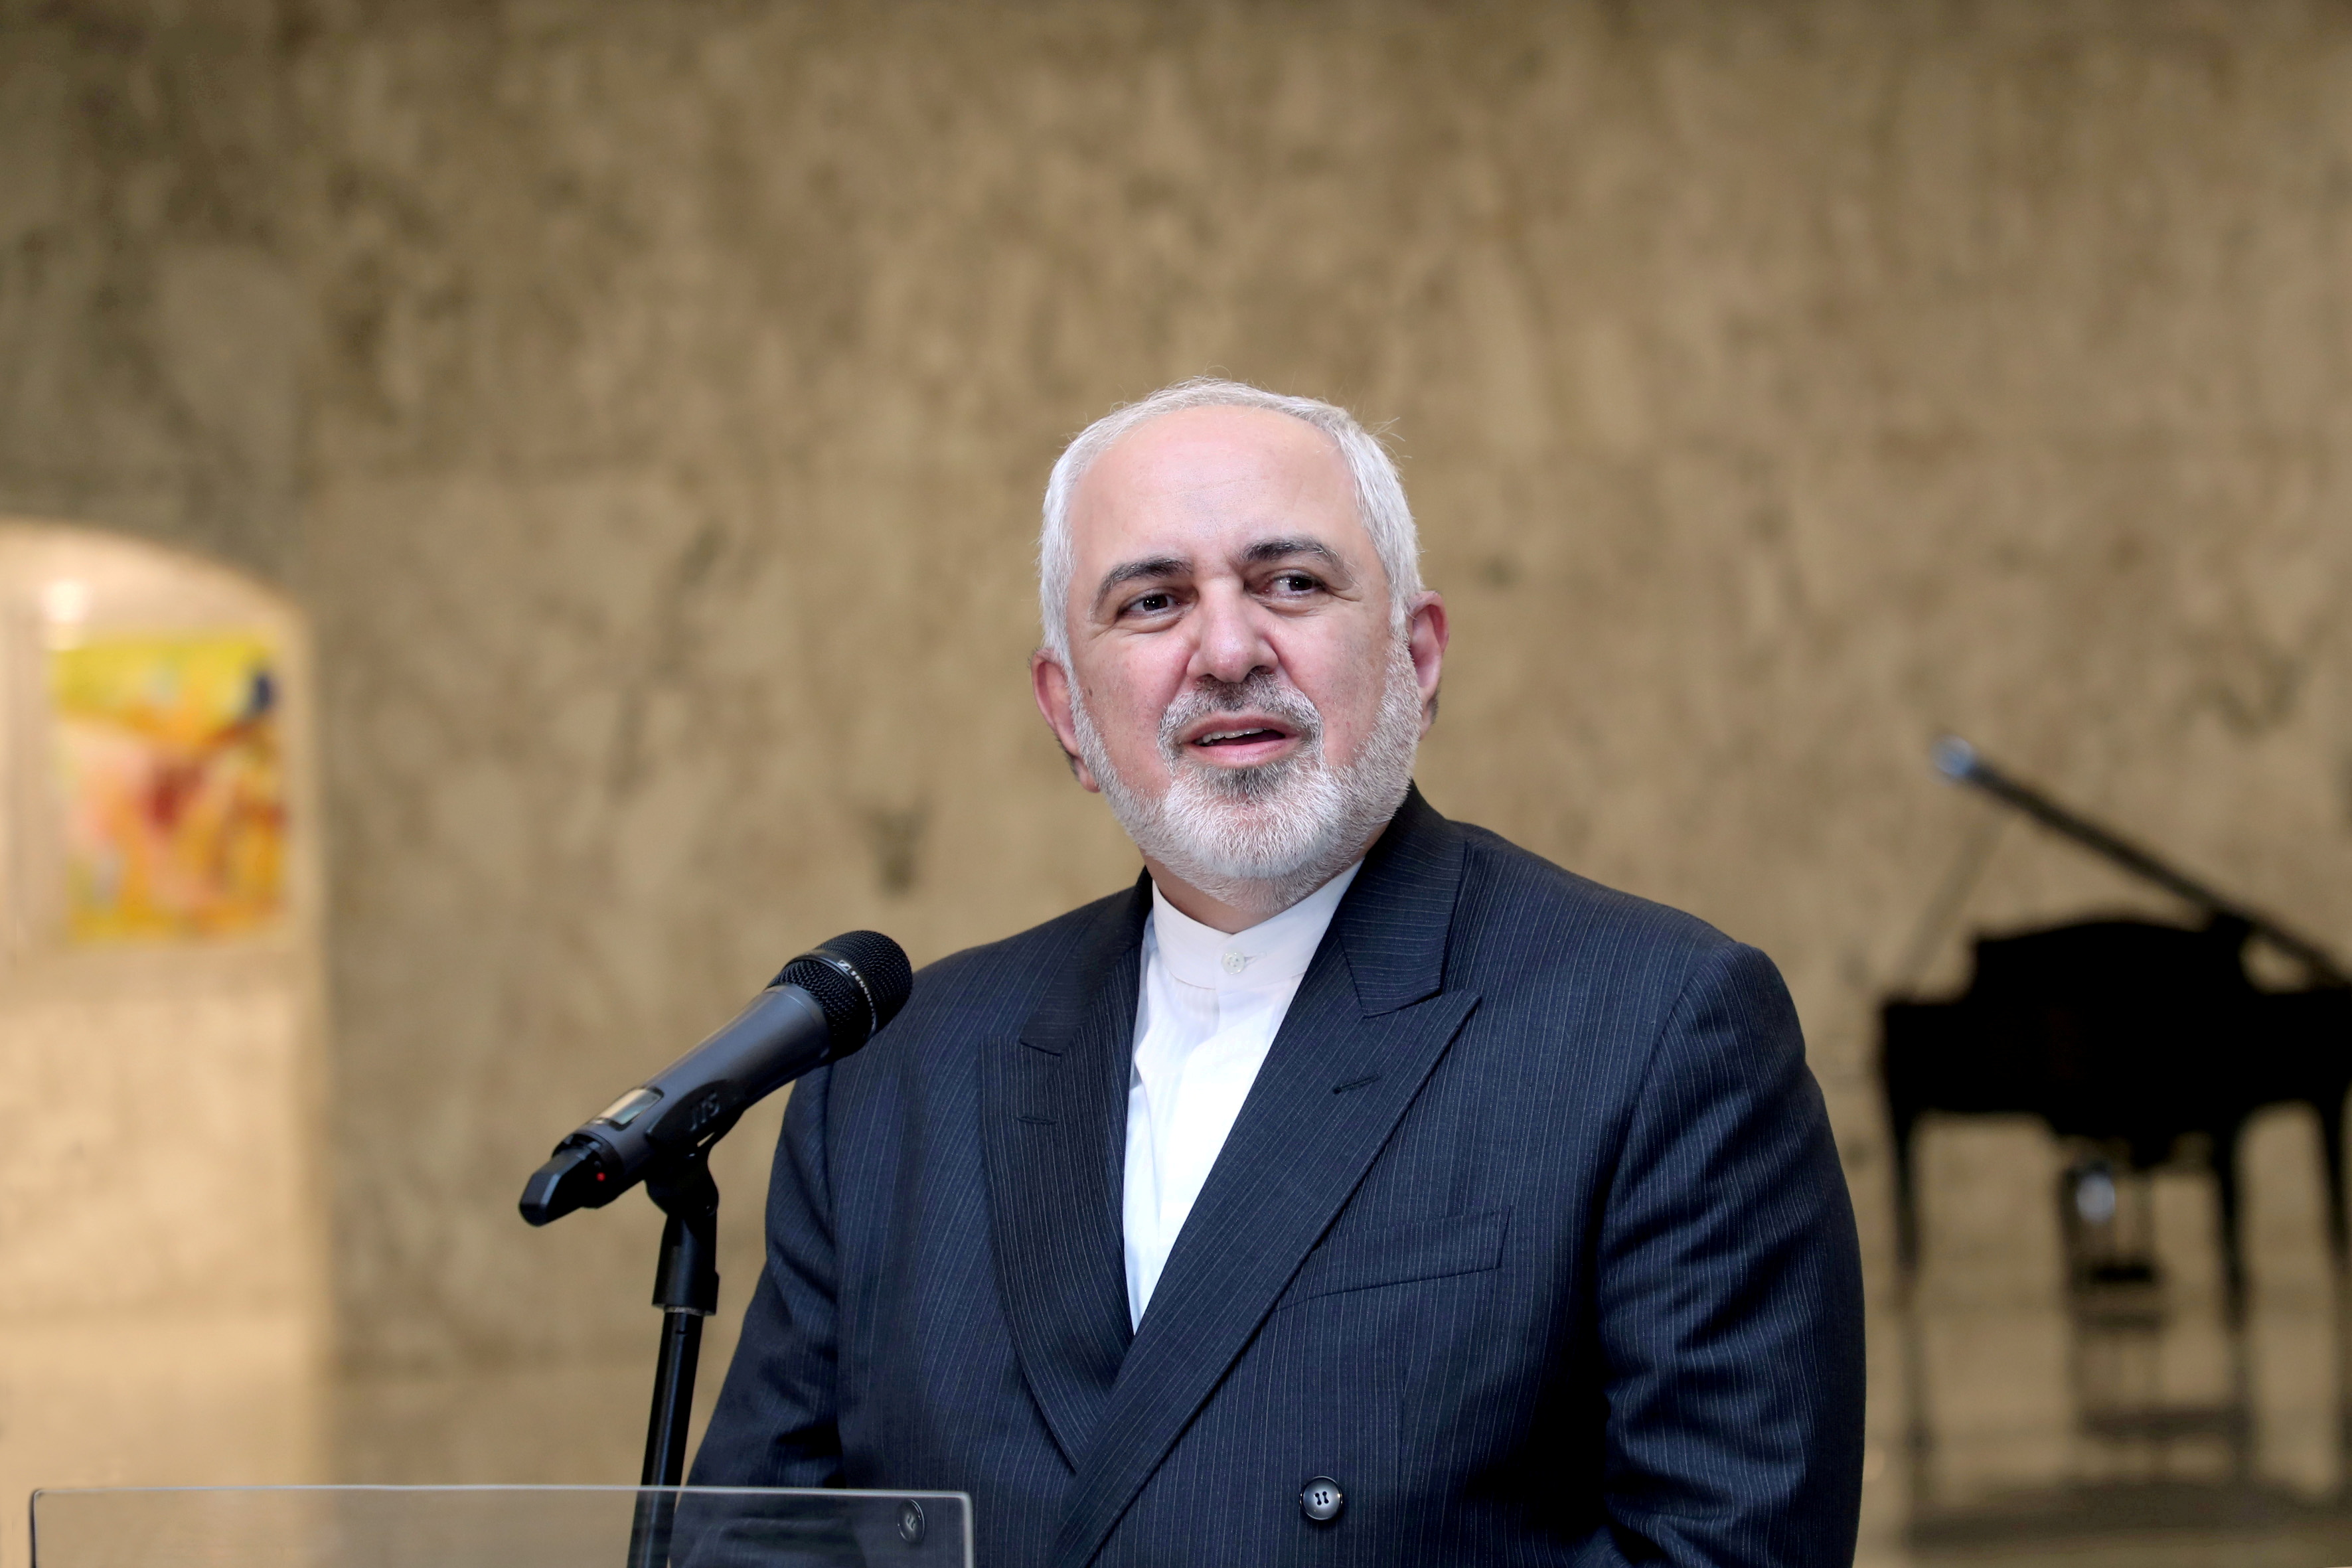 Iran's Foreign Minister Mohammad Javad Zarif speaks at the presidential palace in Baabda